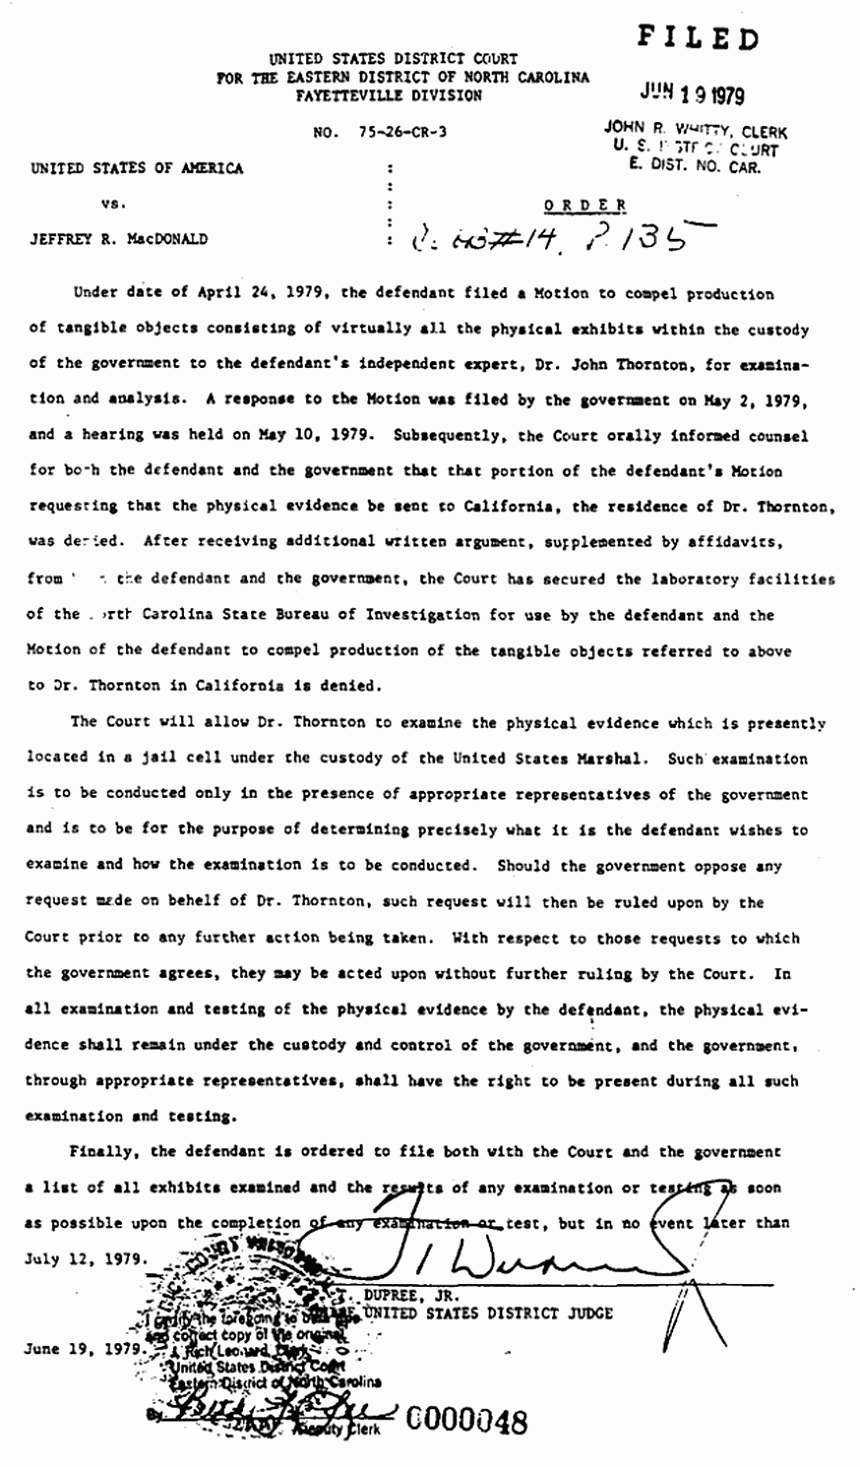 June 19, 1979: Order re: Defense Motion to Compel Production of Tangible Objects